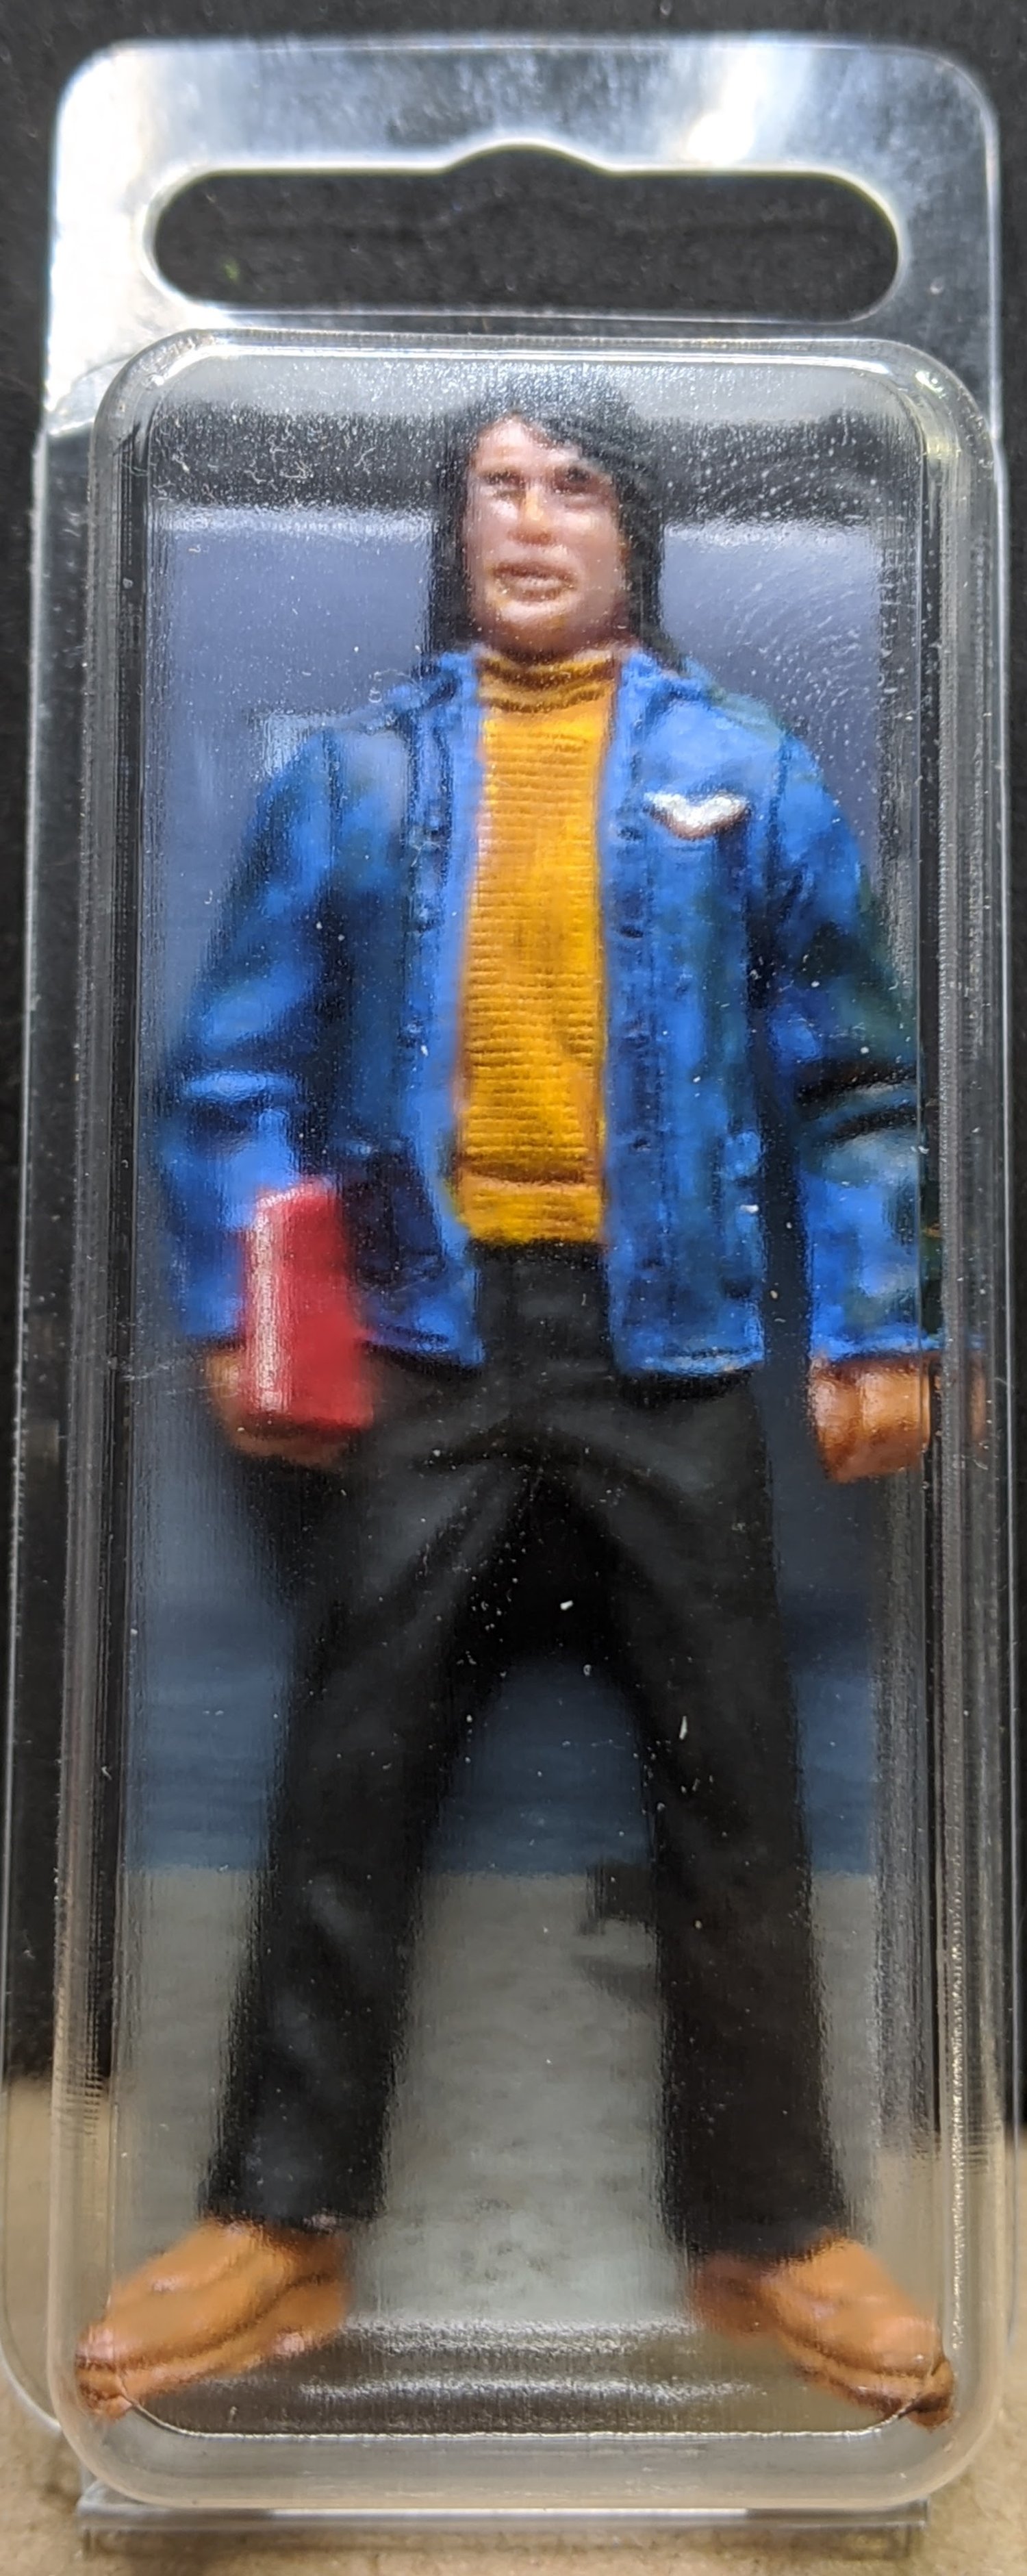 Image of The Boy in the Plastic Clamshell